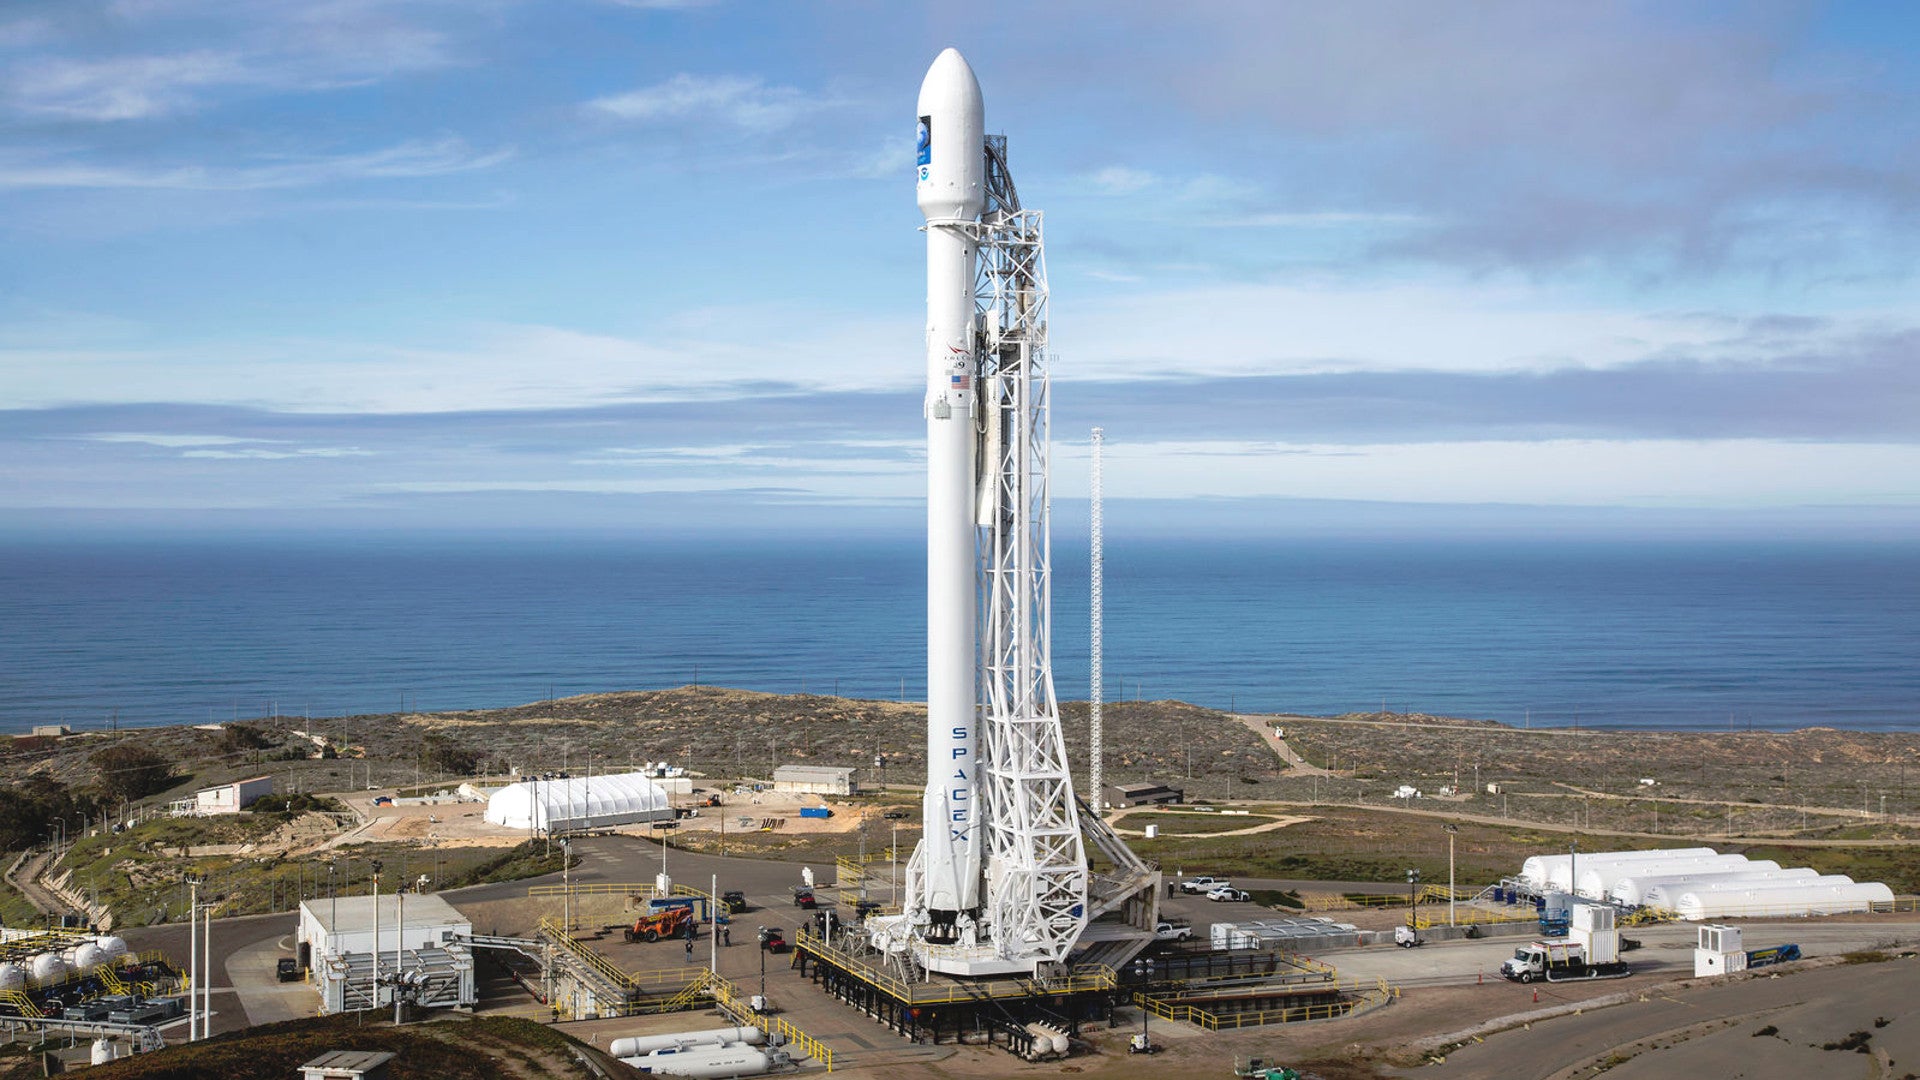 SpaceX Is About to Launch A Mysterious Northrop Grumman Spacecraft Called “Zuma”